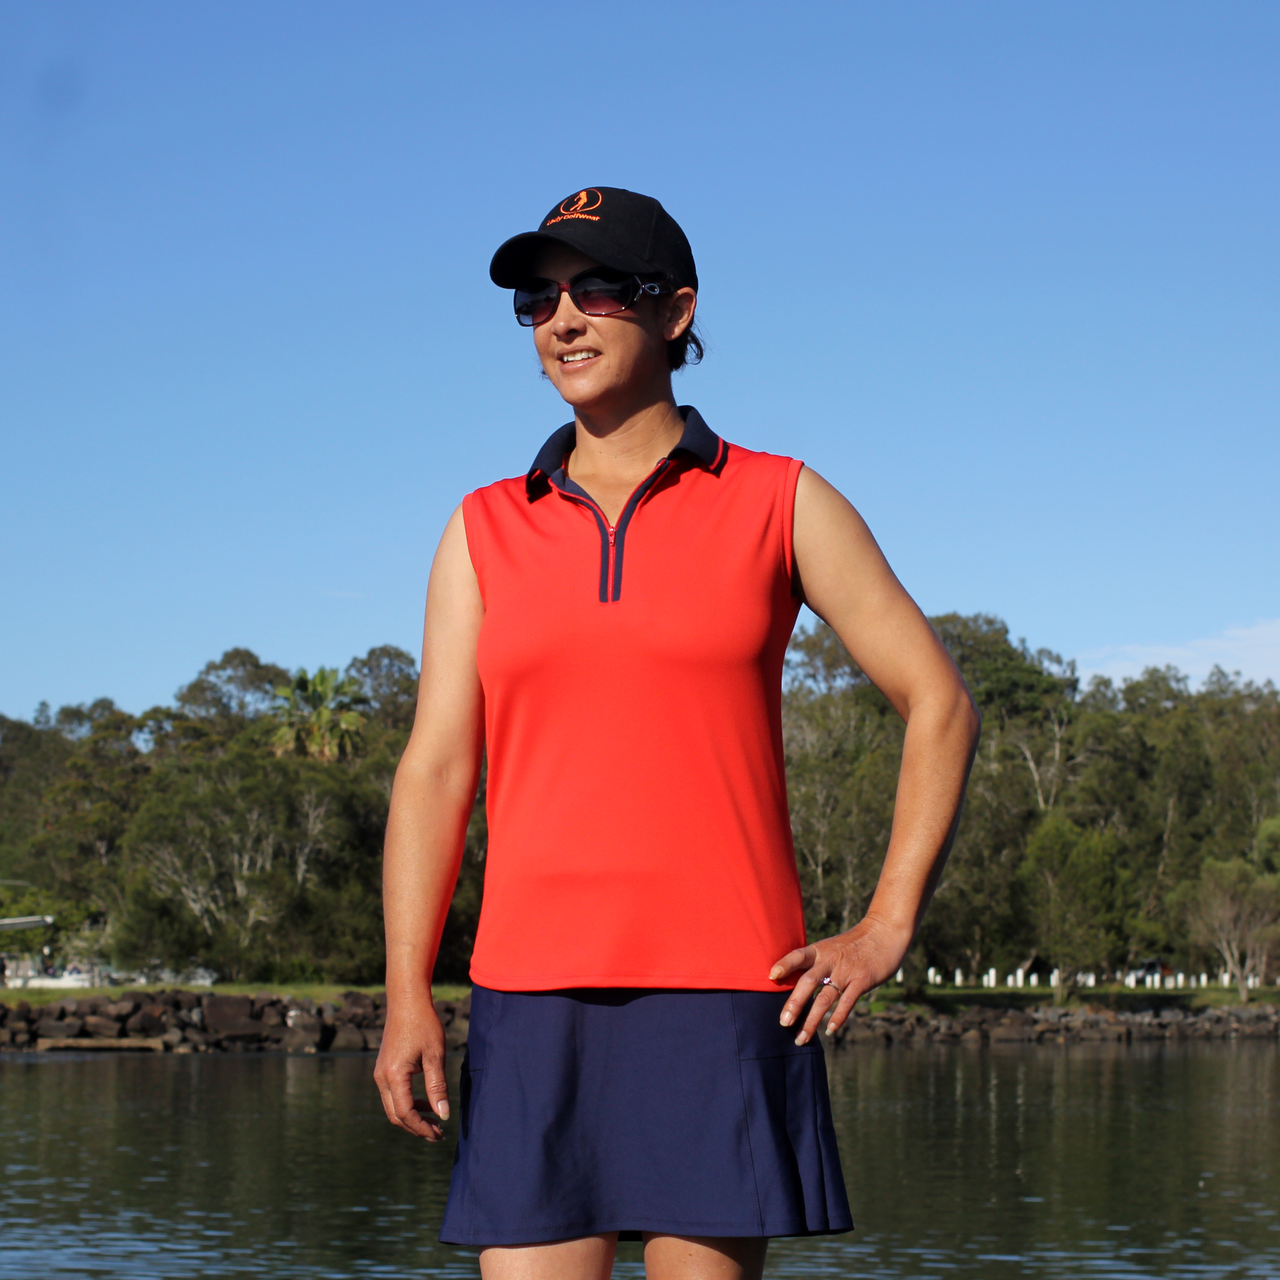 Women's Golf Outfit in Red & Navy - Lady Golfwear